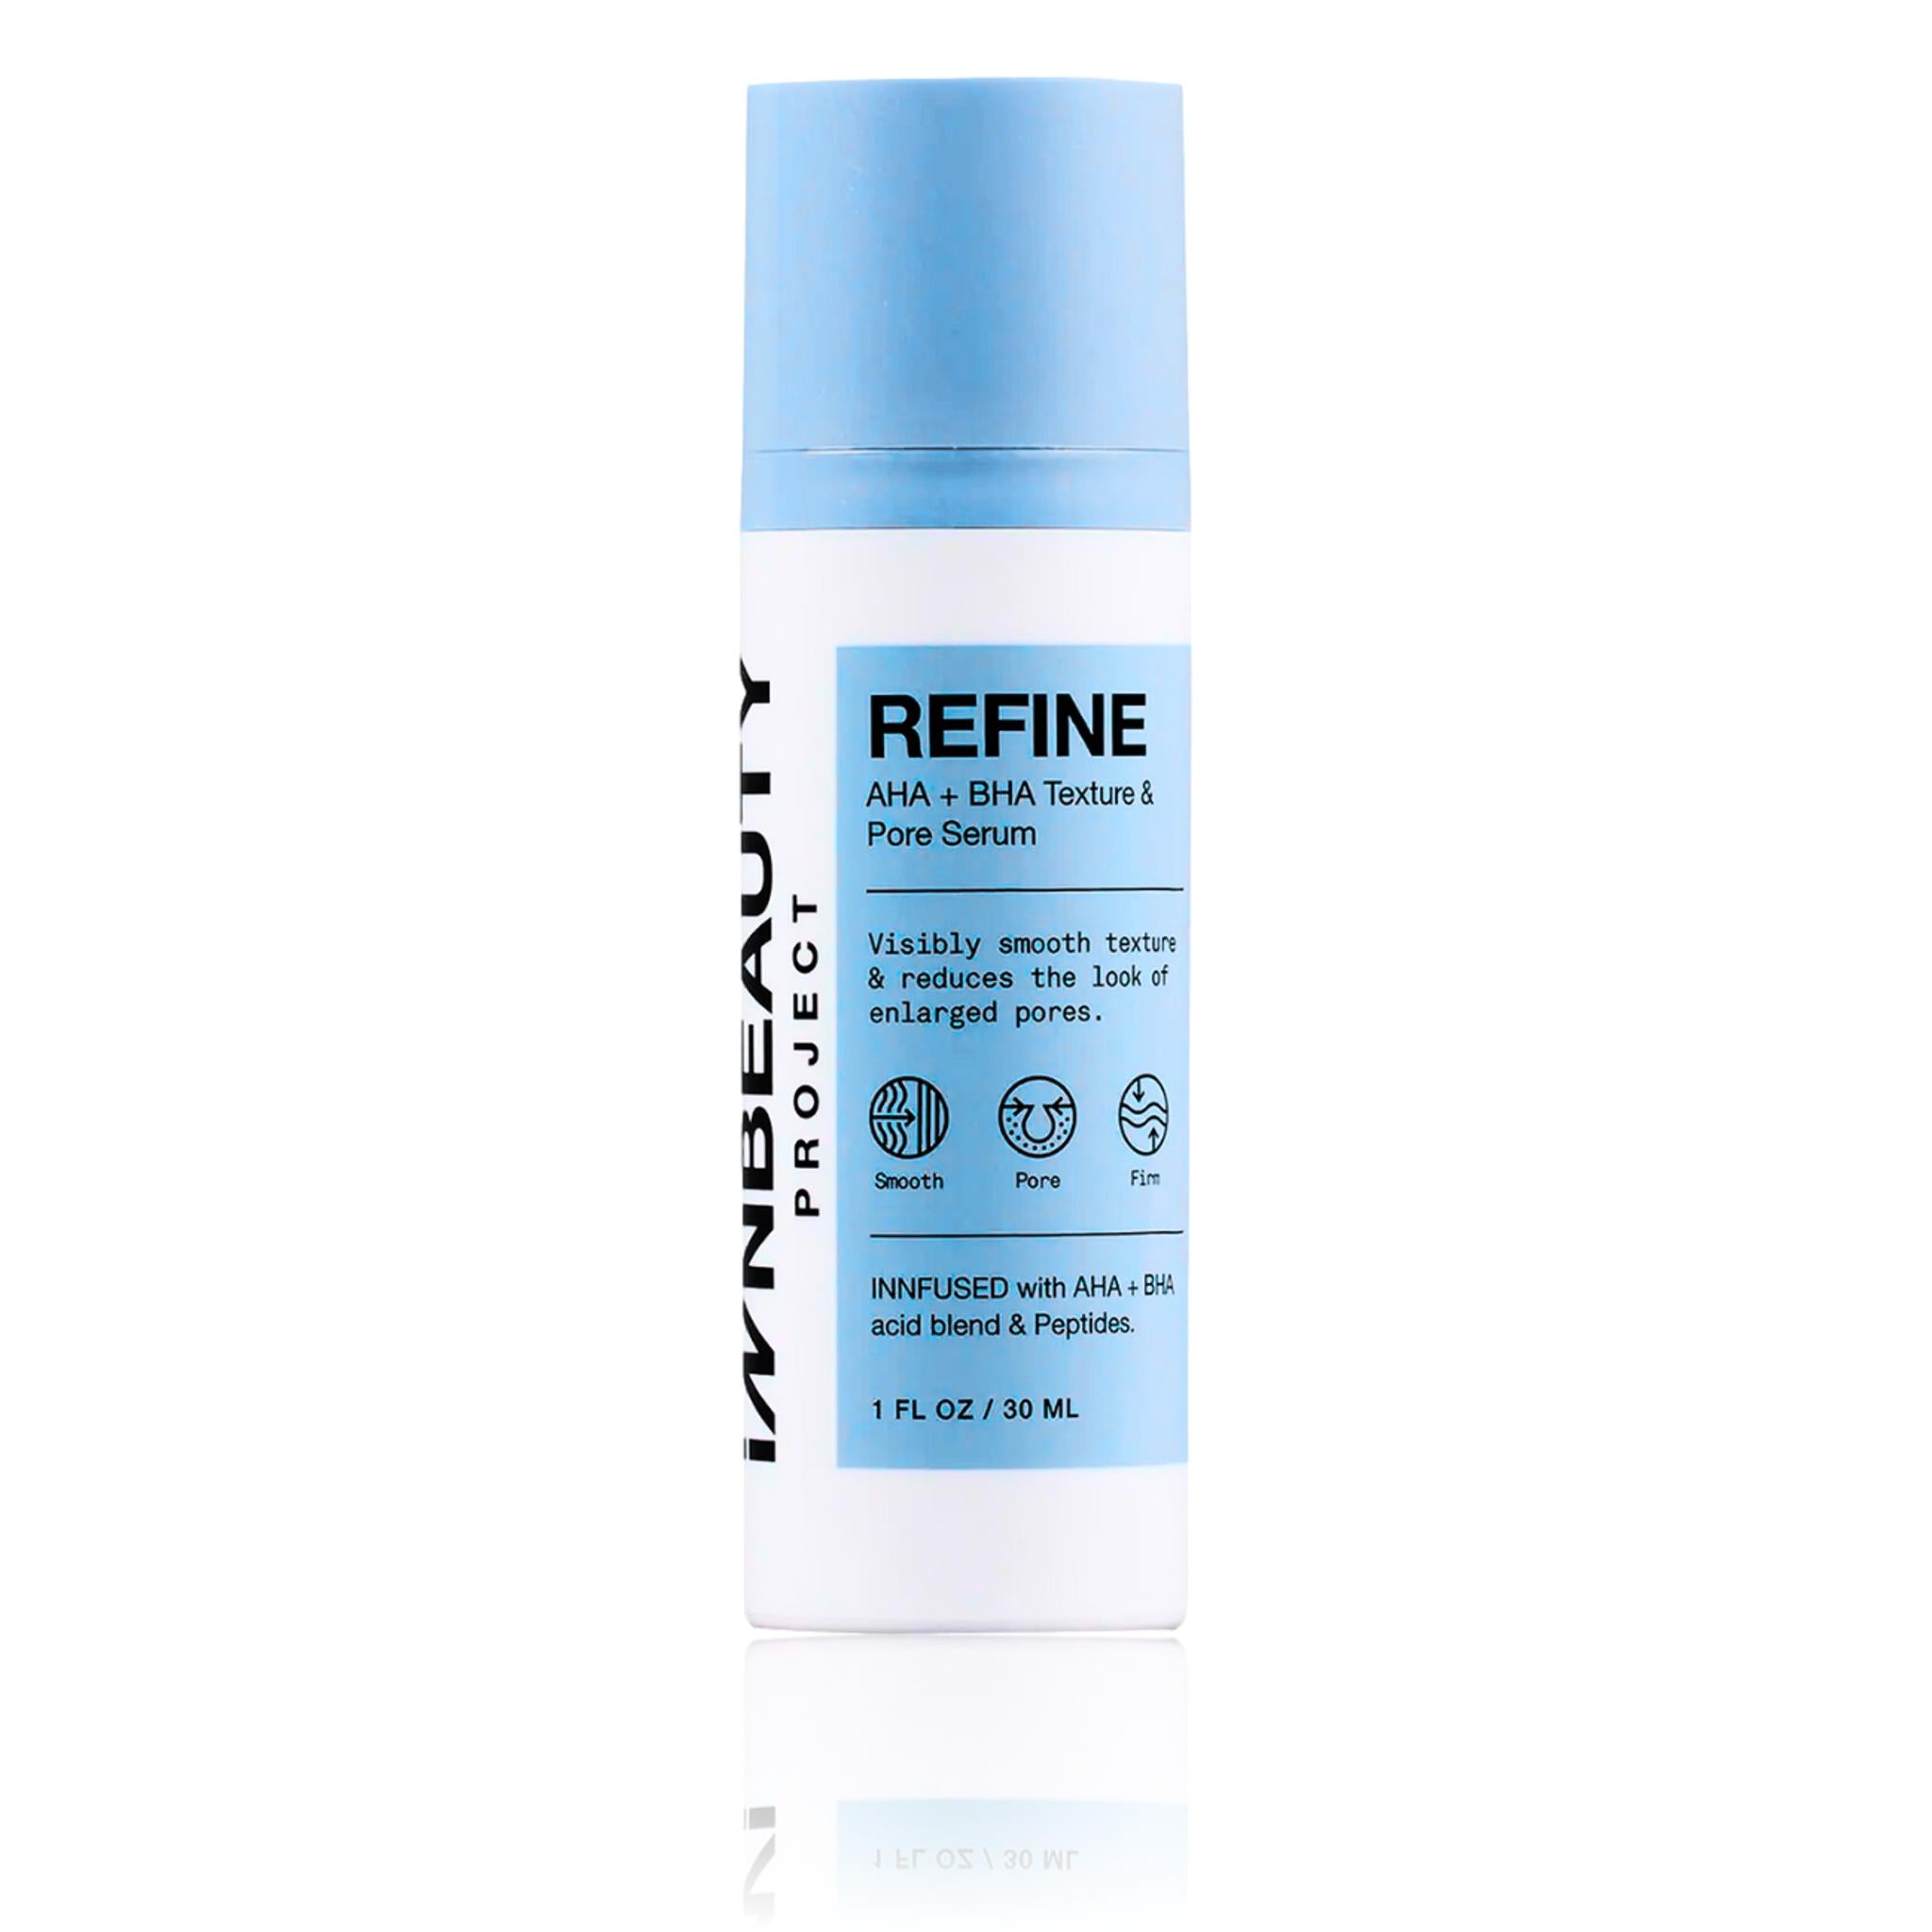 iNNBEAUTY PROJECT Pore Refine Pore Shrinking & Texture Smoothing Serum